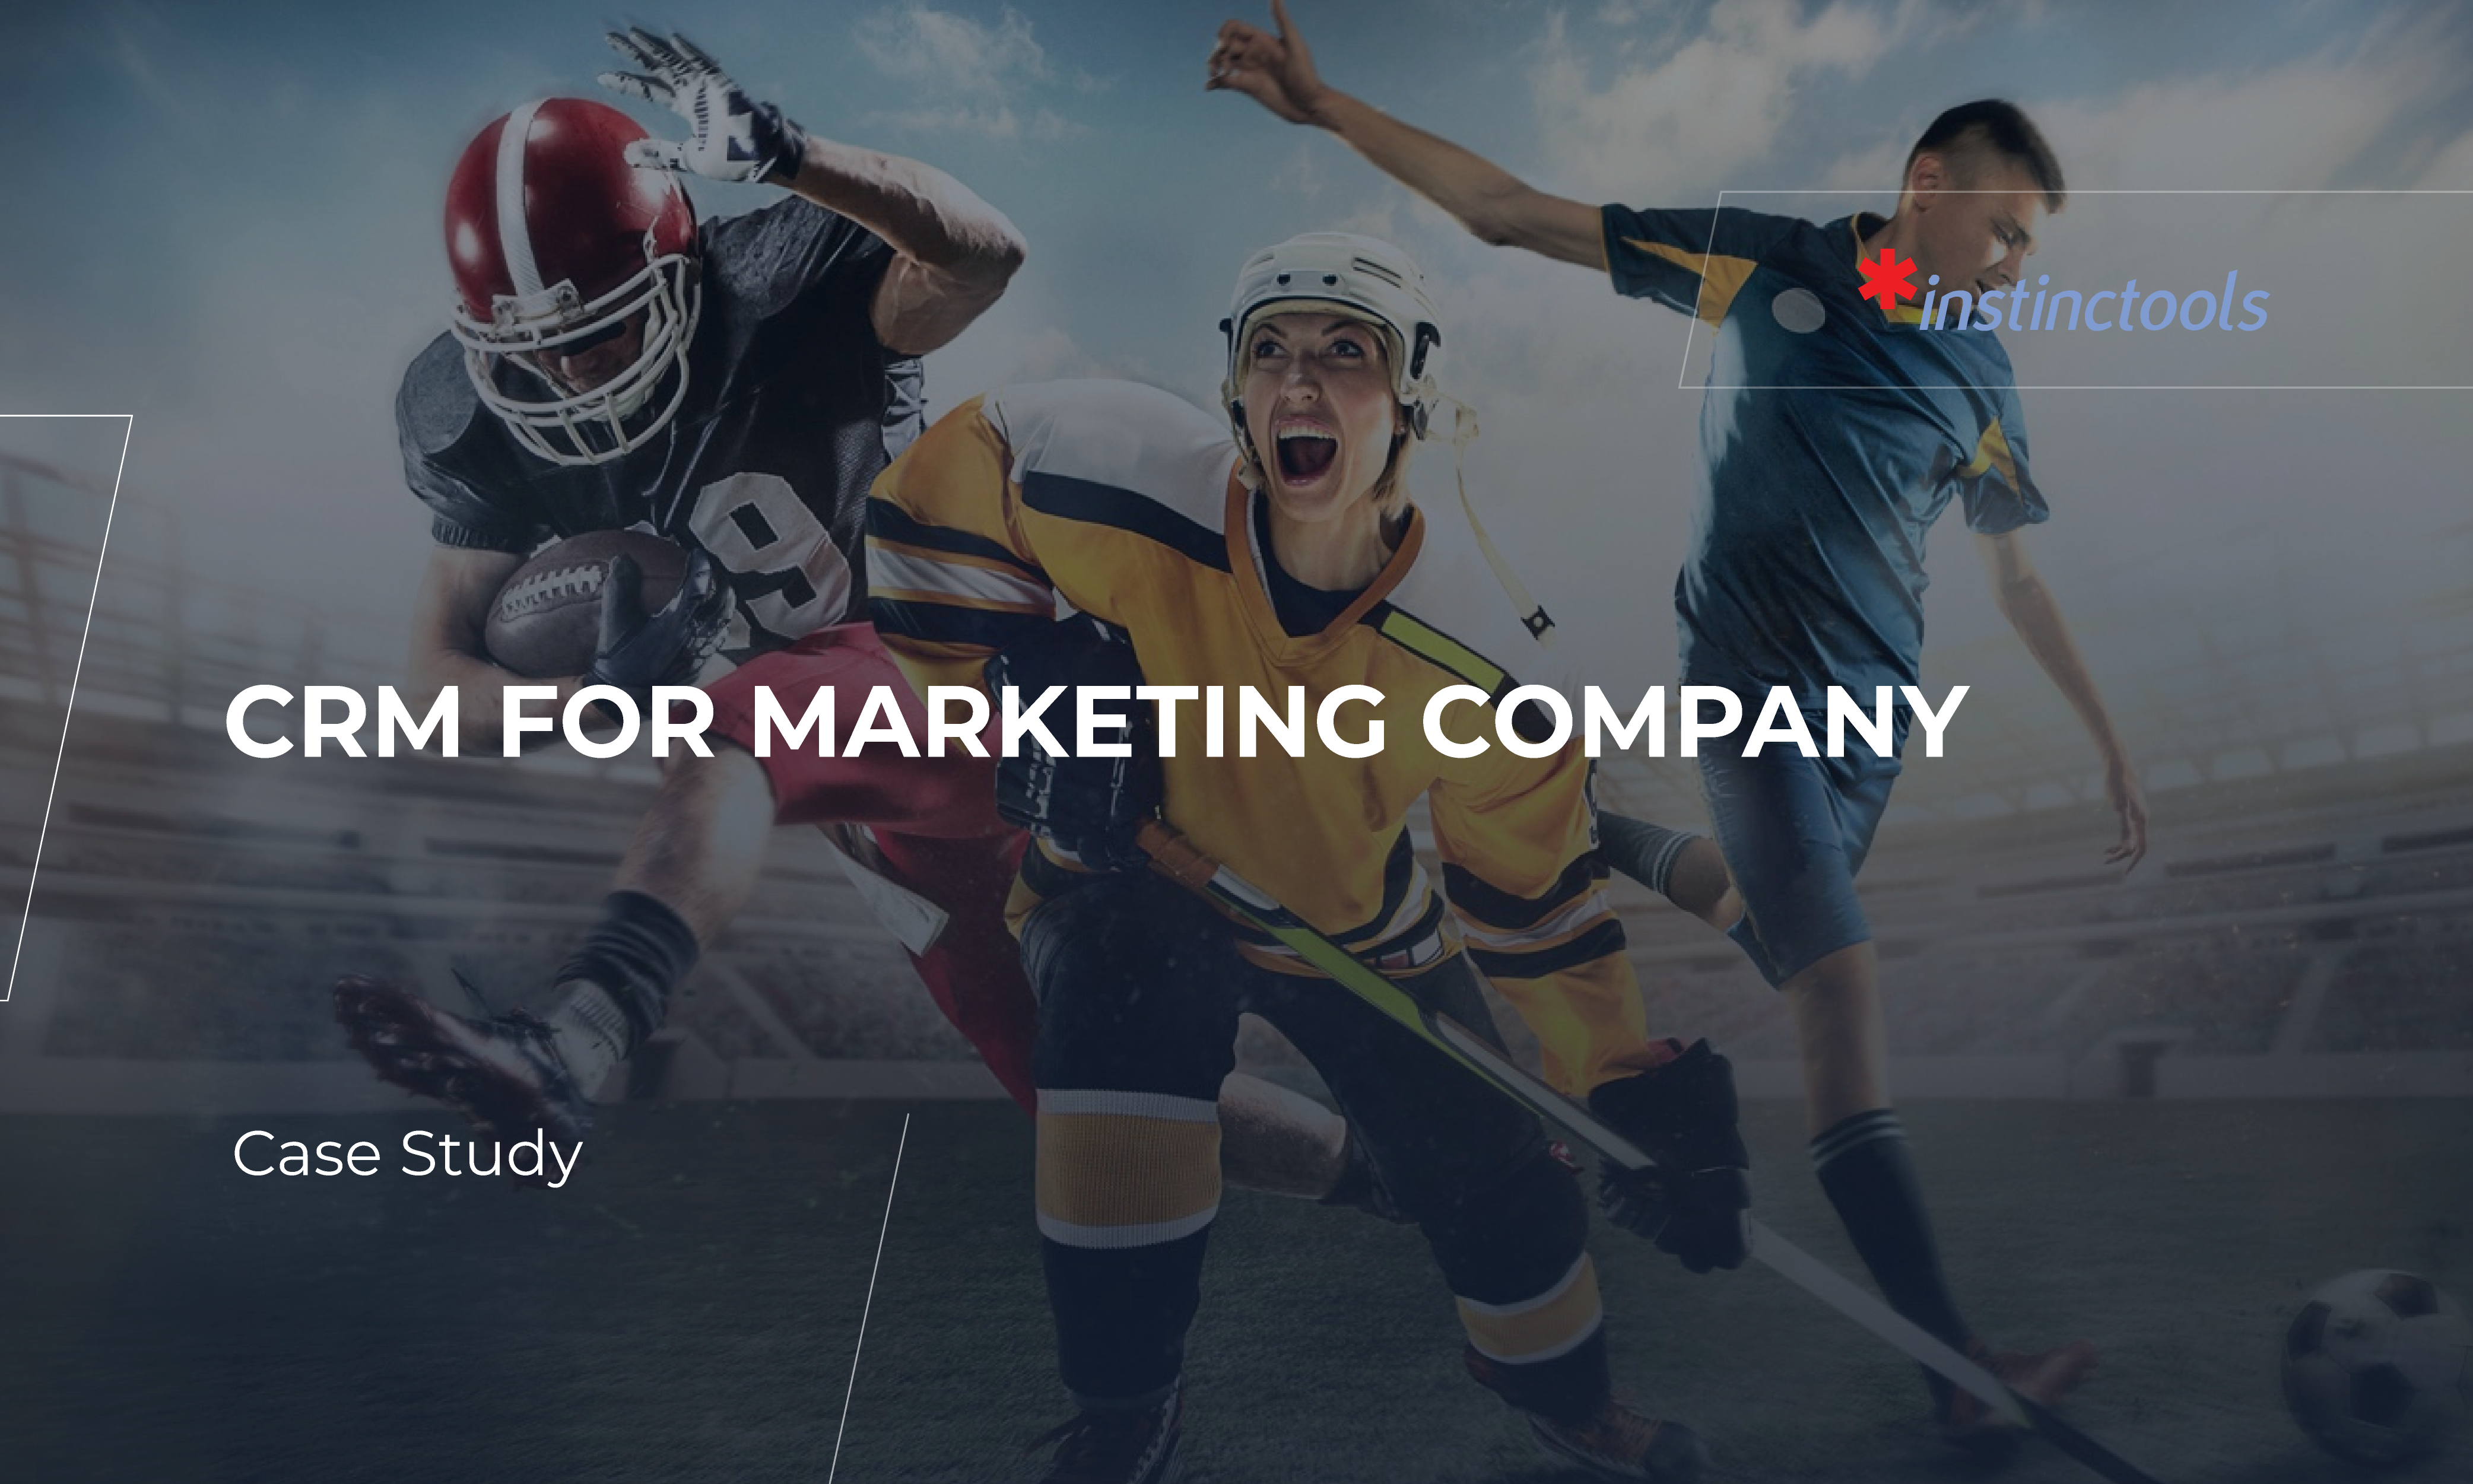 CRM for marketing company